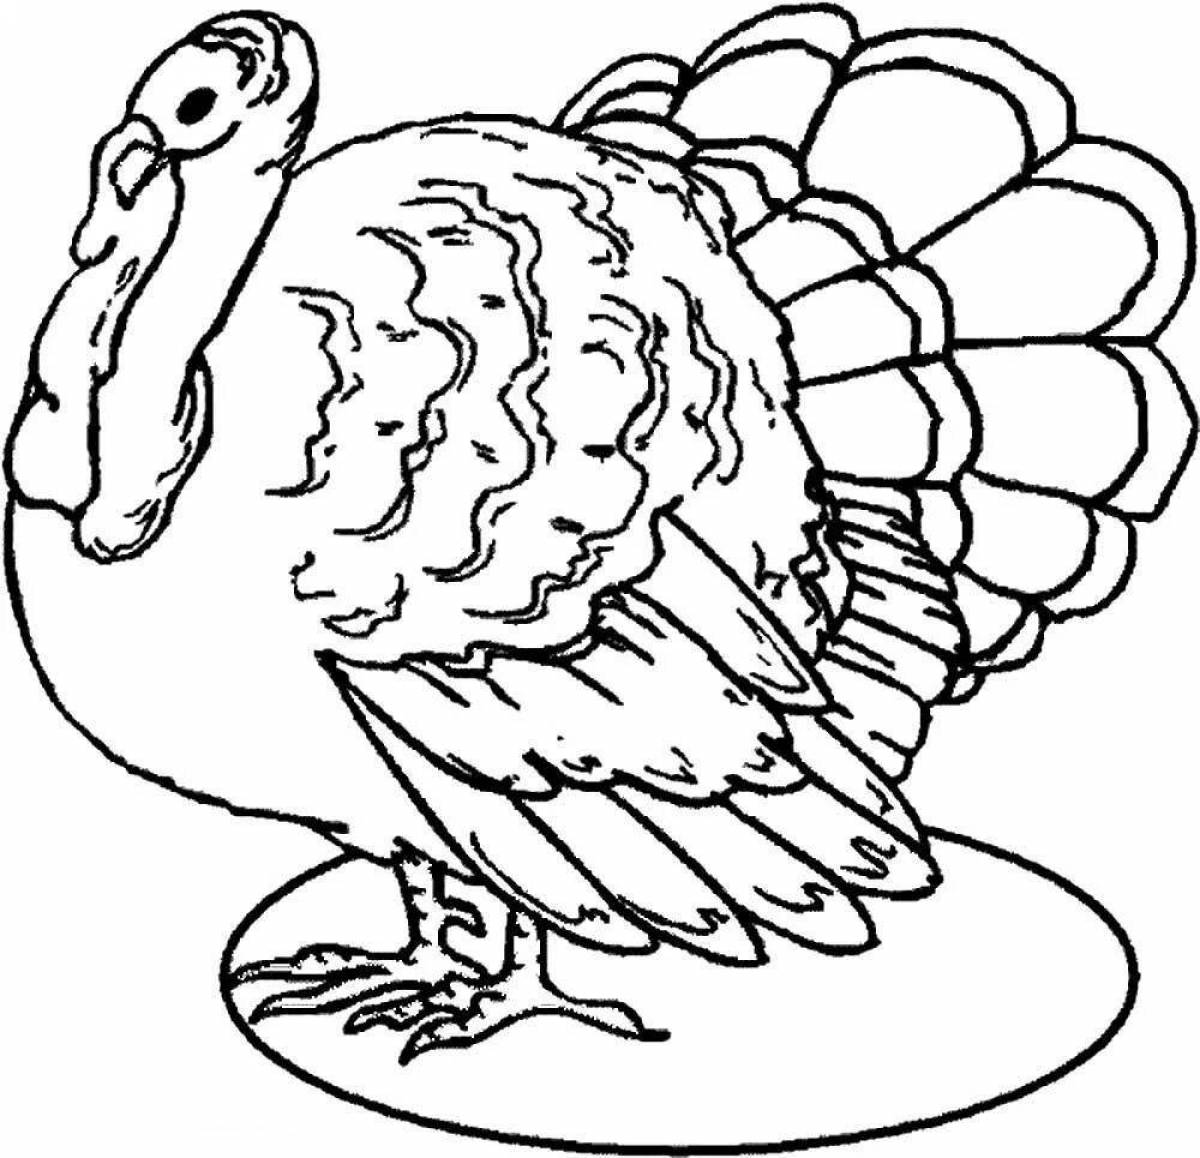 Attractive poultry coloring page for 5-6 year olds